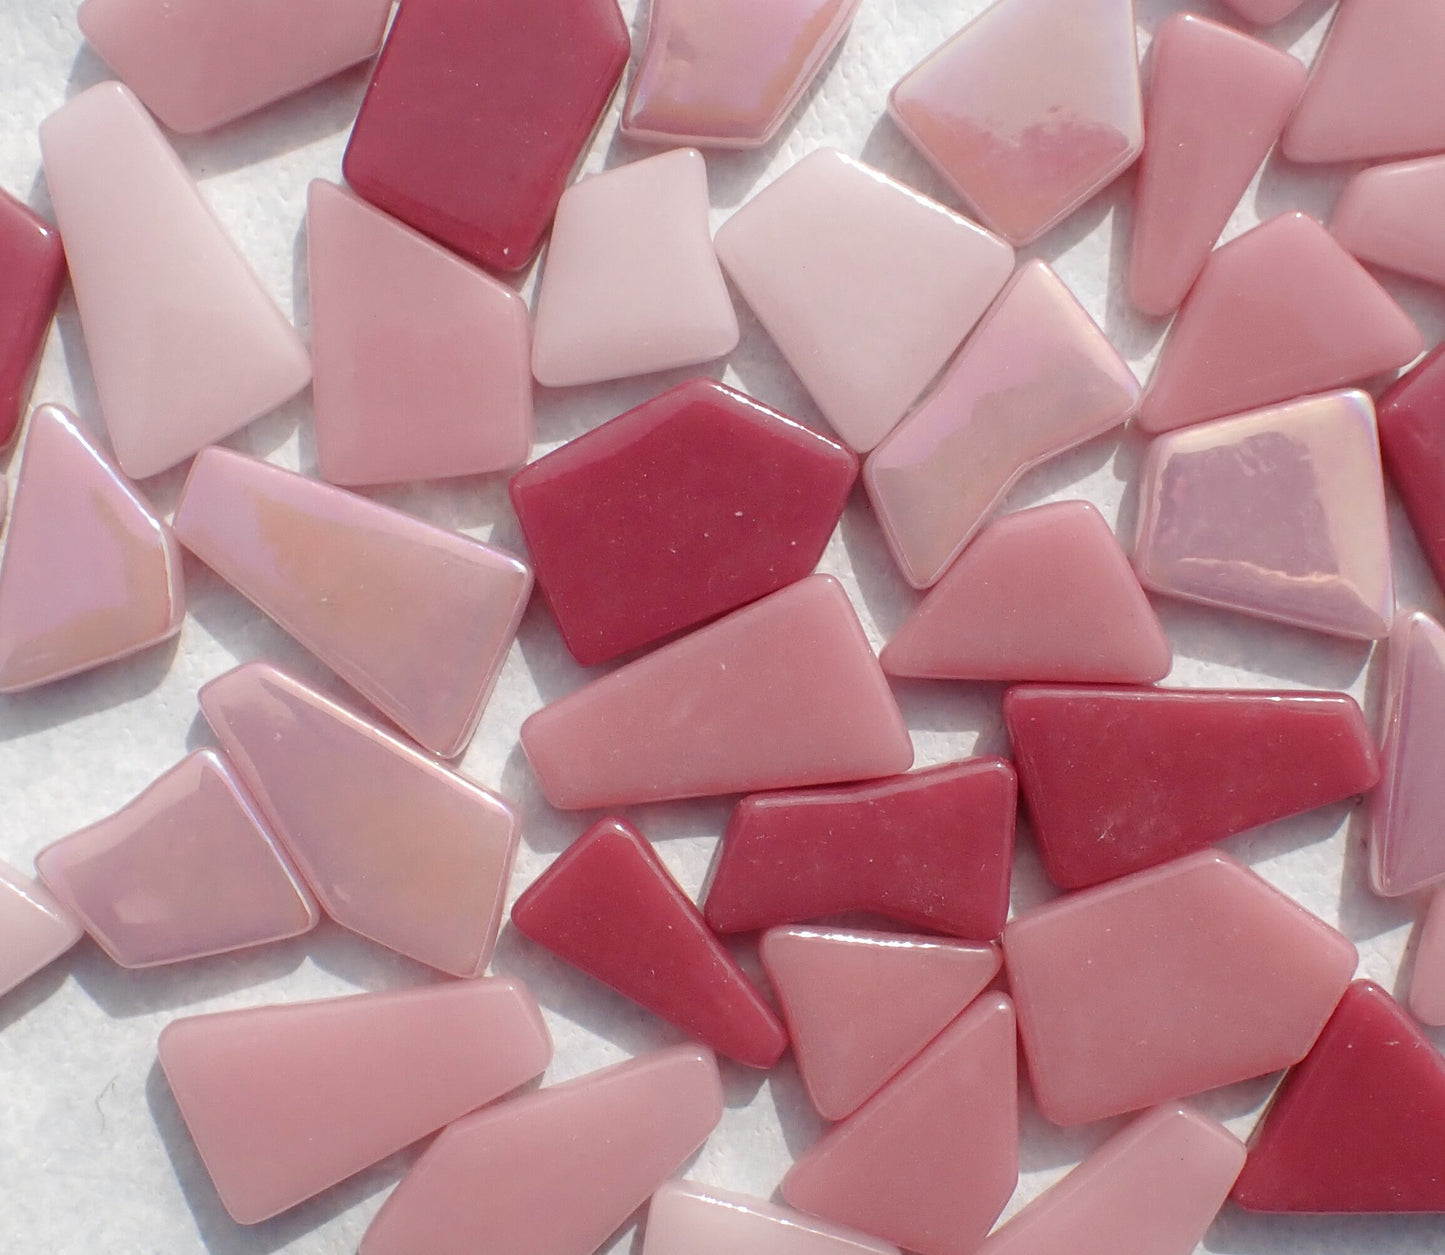 Plenty of Pink Irregular Glass Tiles - 50g of Polygons in Mix of Sizes - Dreamdrift